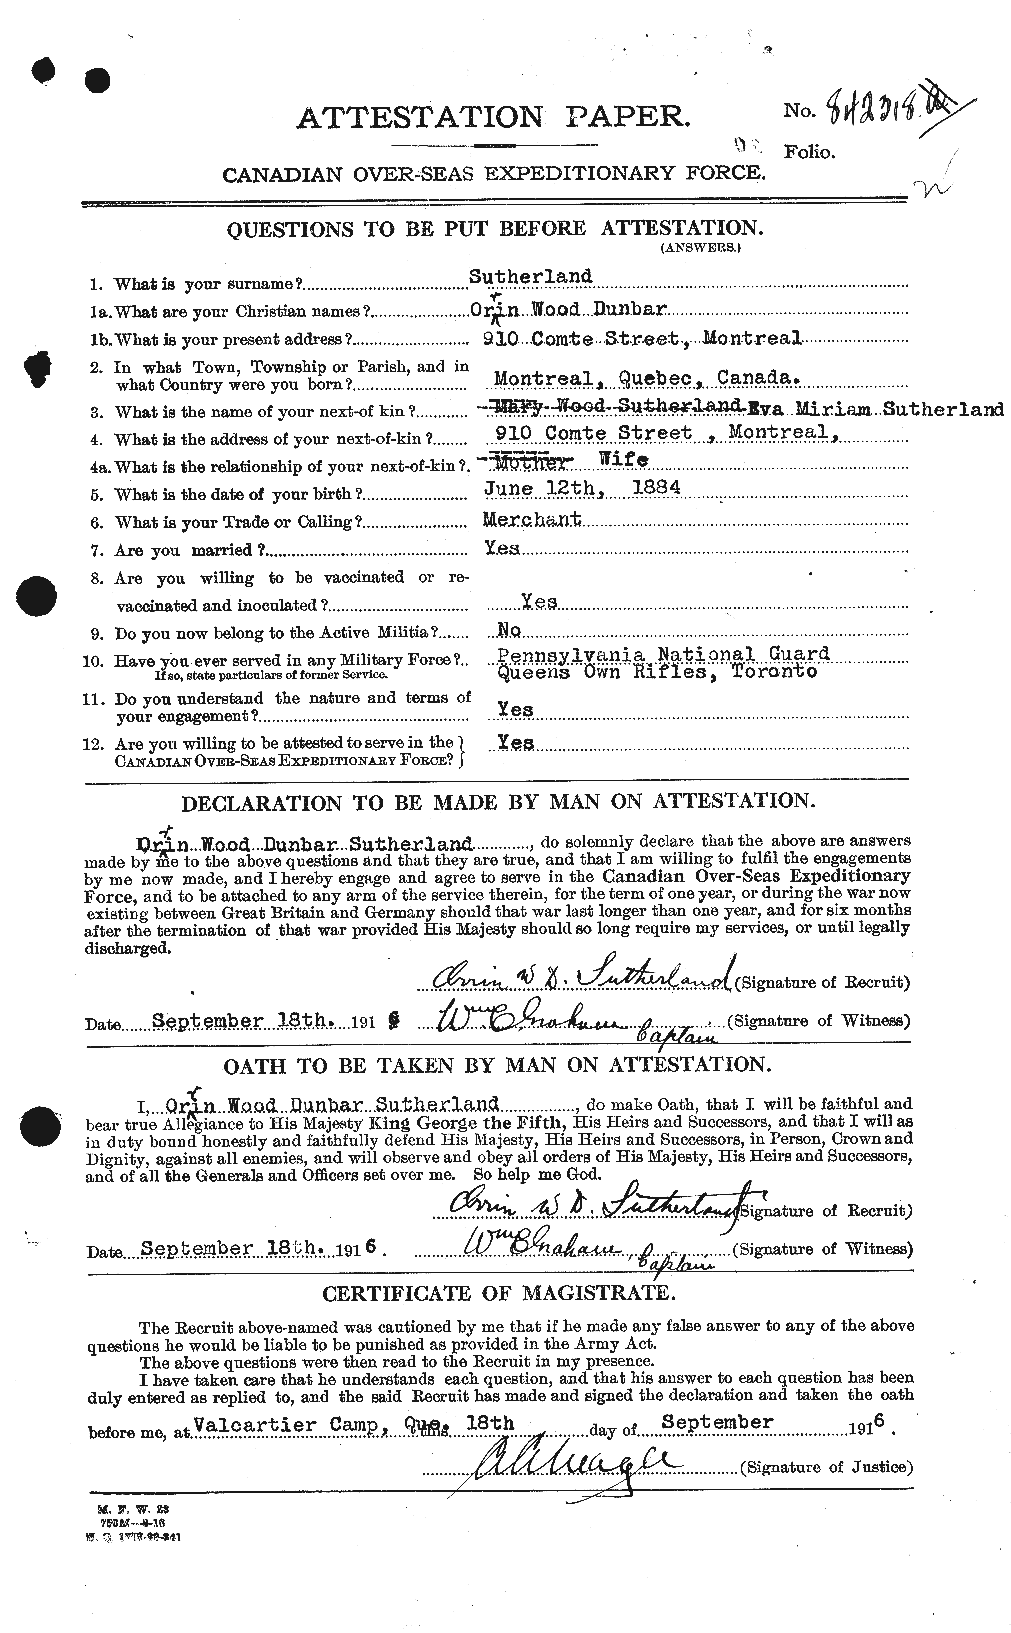 Personnel Records of the First World War - CEF 126829a